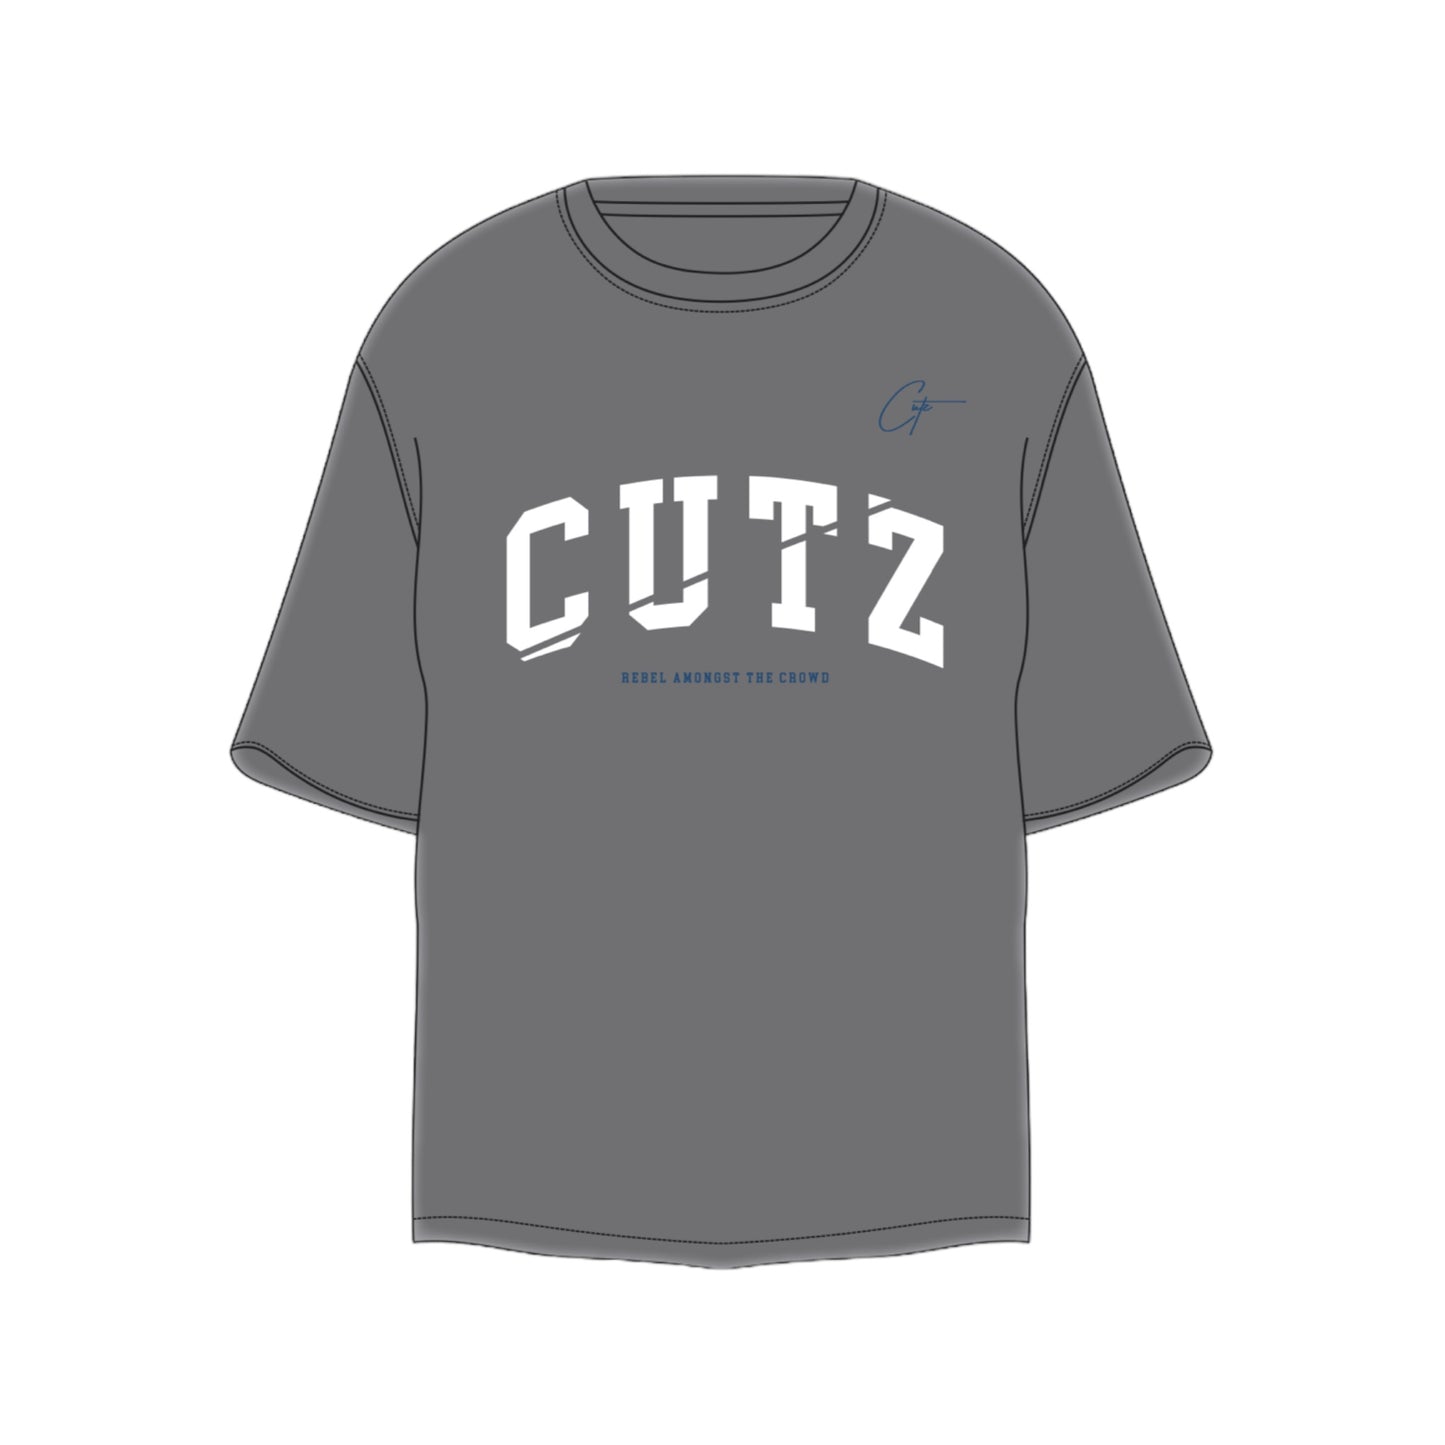 CUTZ "Rebel Amongst The Crowd" Signature Shirt (Shadow Color)